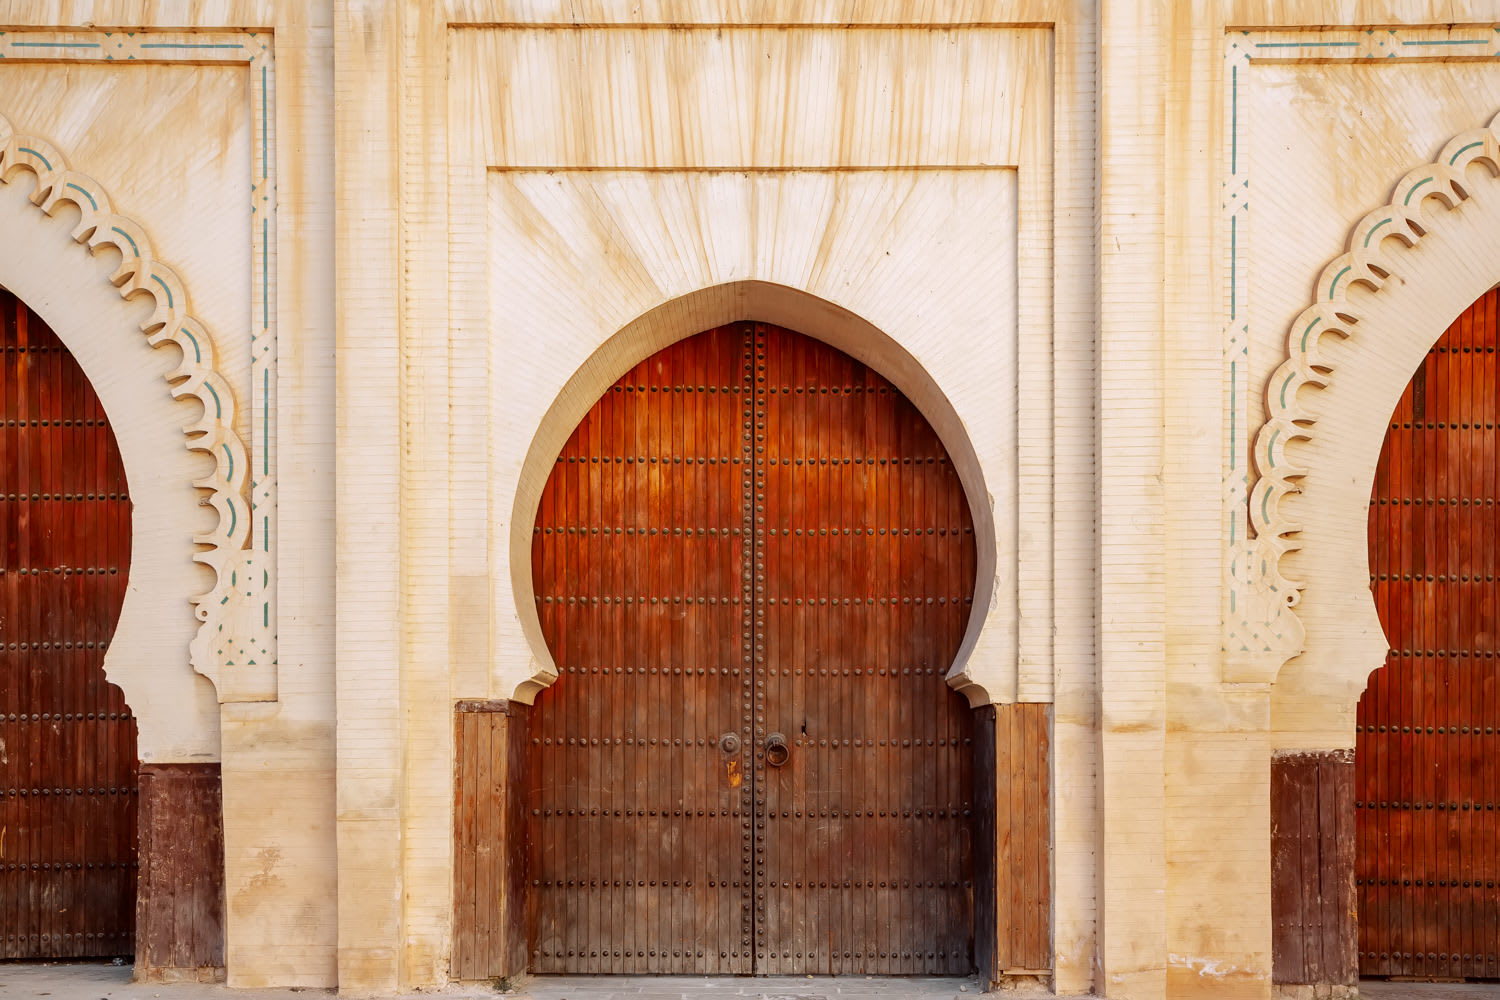 Our self-guided walking tour of Fez medina